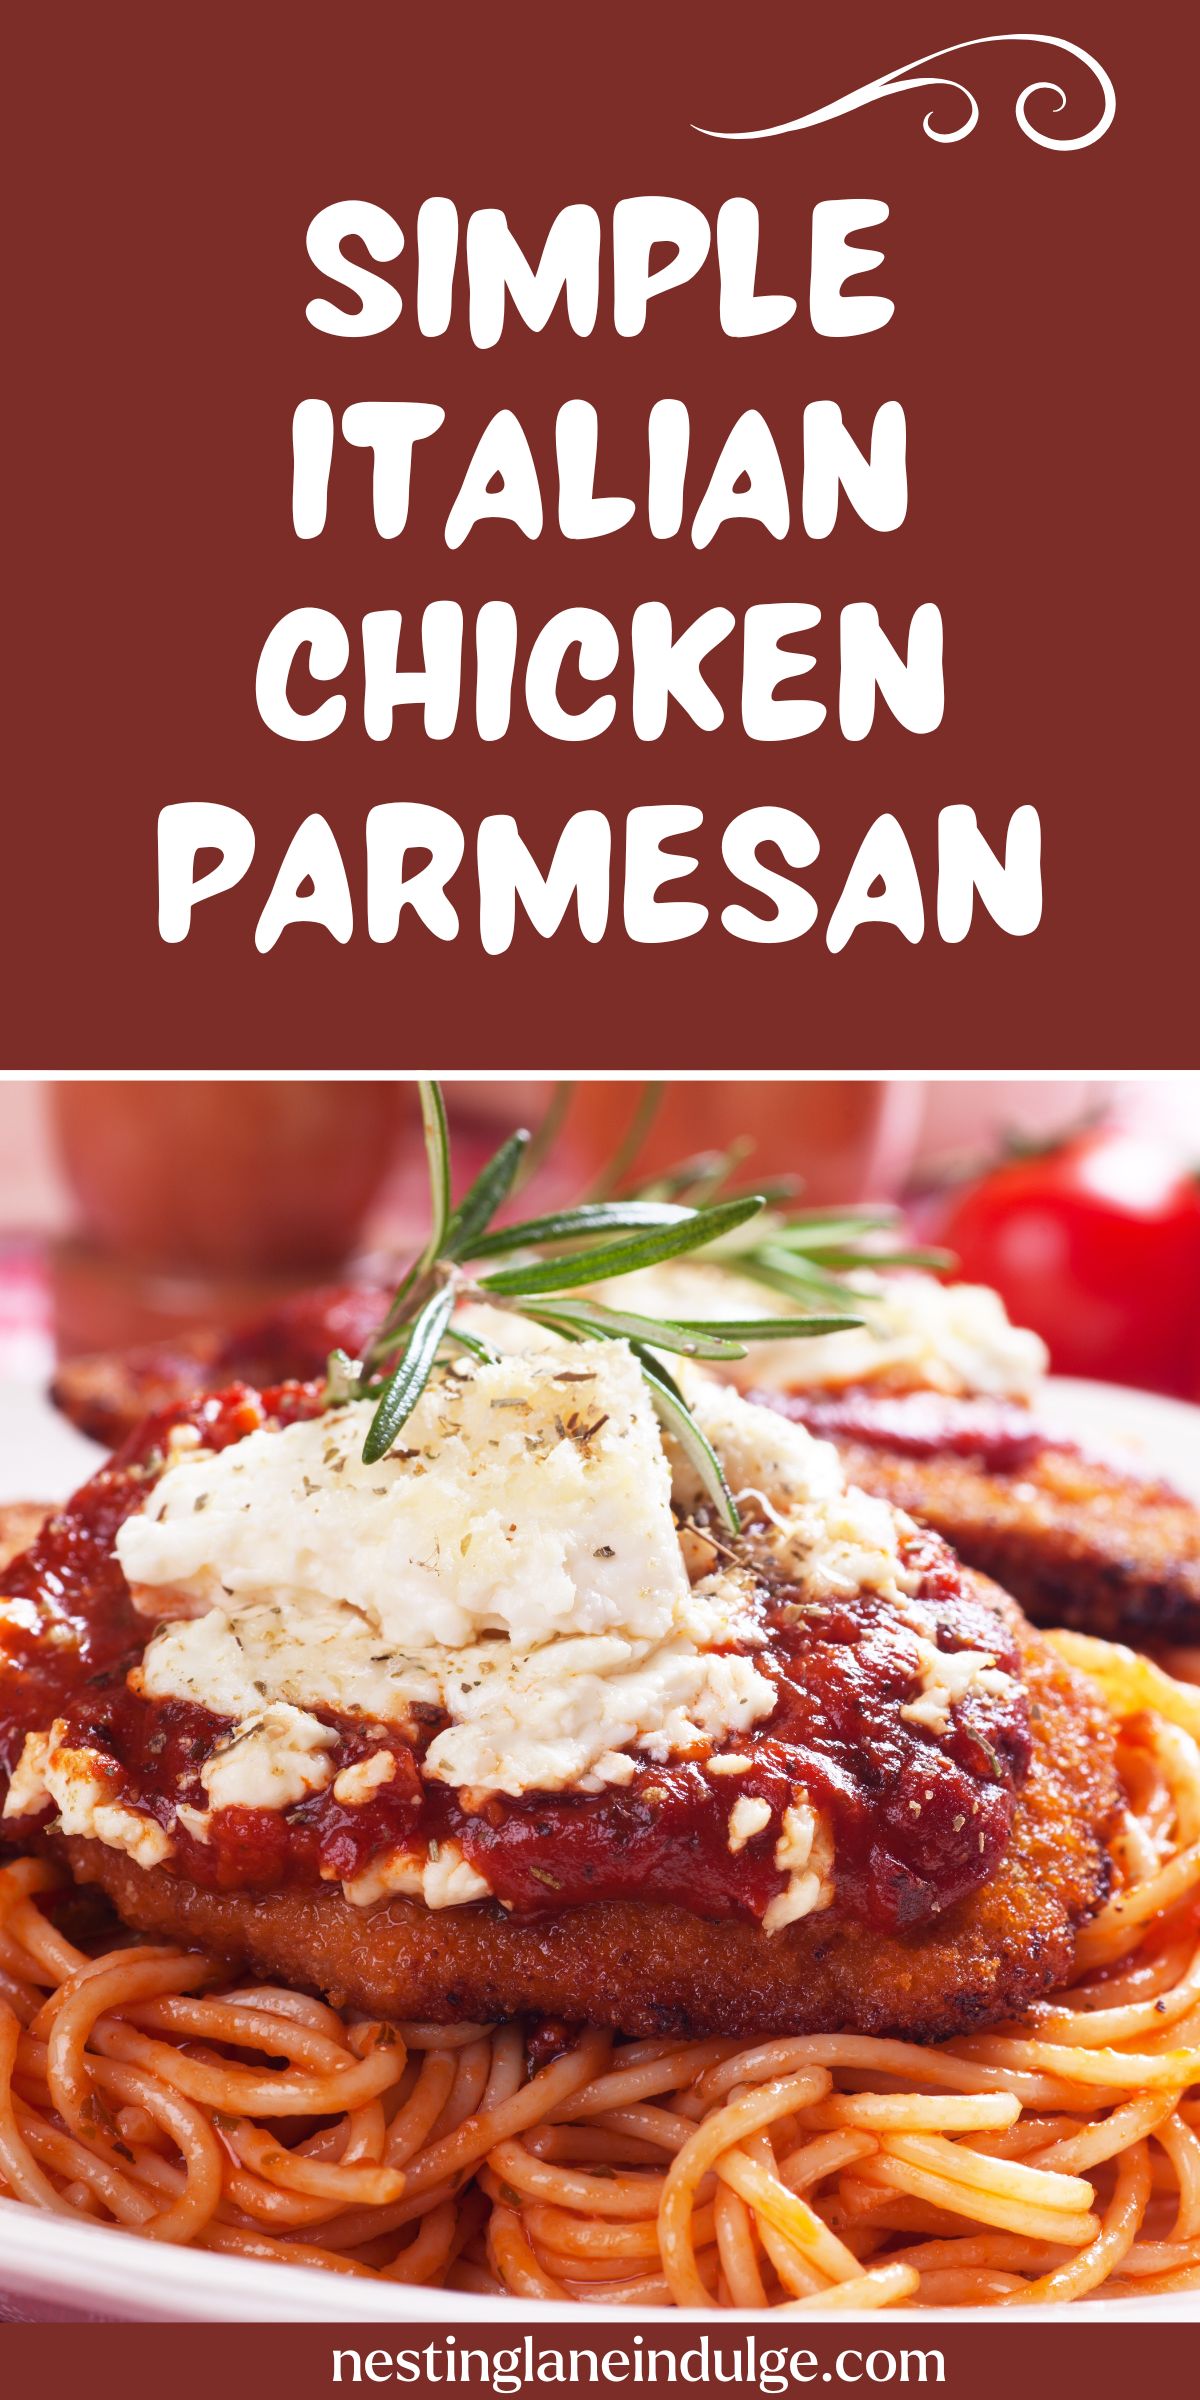 The image displays a promotional graphic for "Simple Italian Chicken Parmesan" from nestinglaneindulge.com. The top half of the graphic features the name of the dish in large, white script letters against a dark red background, with an elegant swirl detail above the word 'Simple'. The bottom half showcases a close-up photo of the dish, consisting of a crispy breaded chicken breast topped with melted cheese and marinara sauce, served on a bed of spaghetti, with a sprig of rosemary on top for garnish.